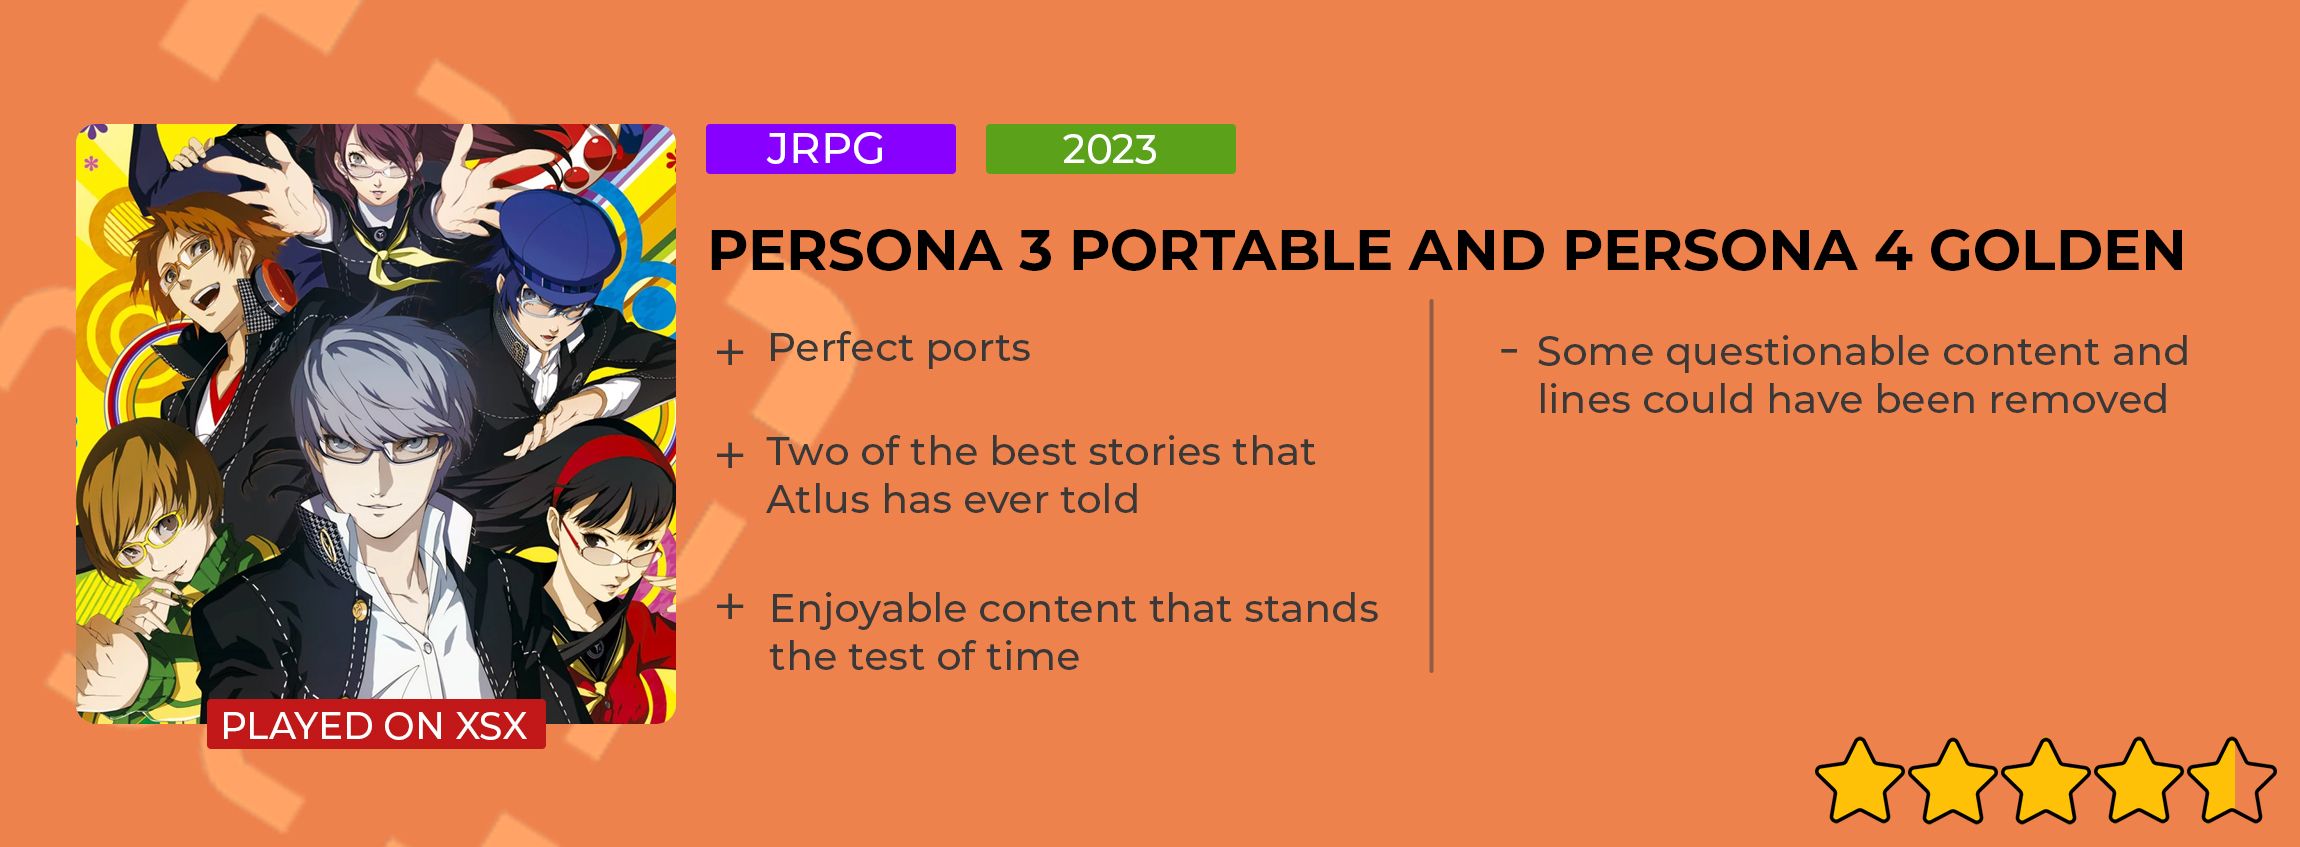 Persona 3 and 4 review card for TheGamer that gives it 4.5/5.